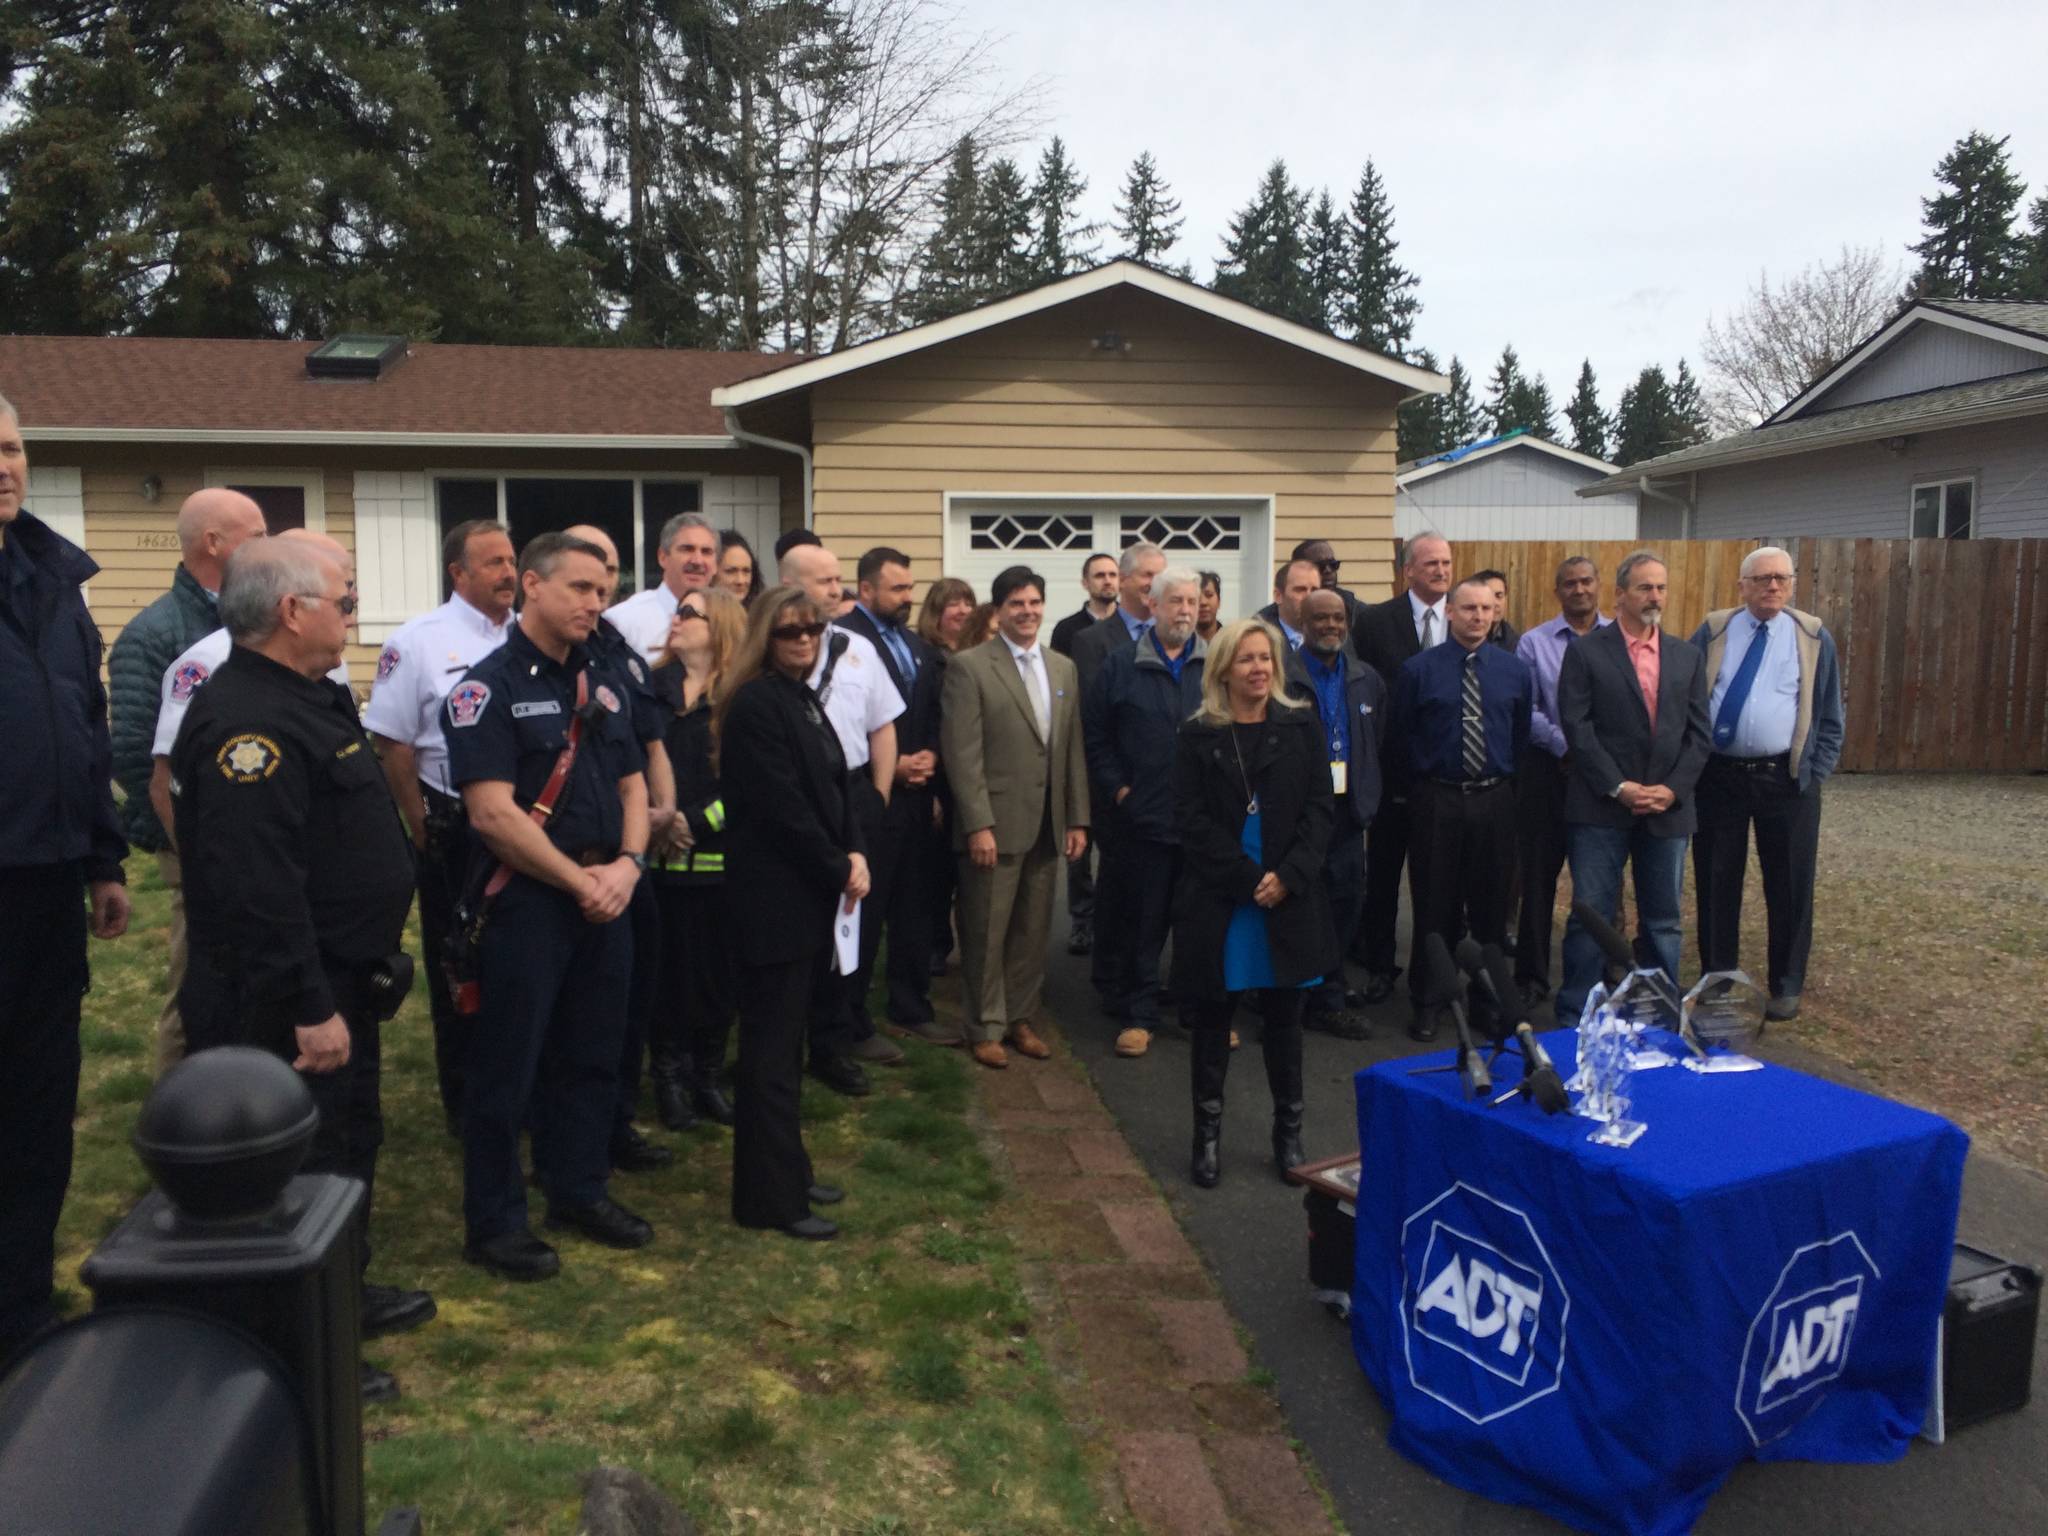 Renton resident thanks first responders who saved her life